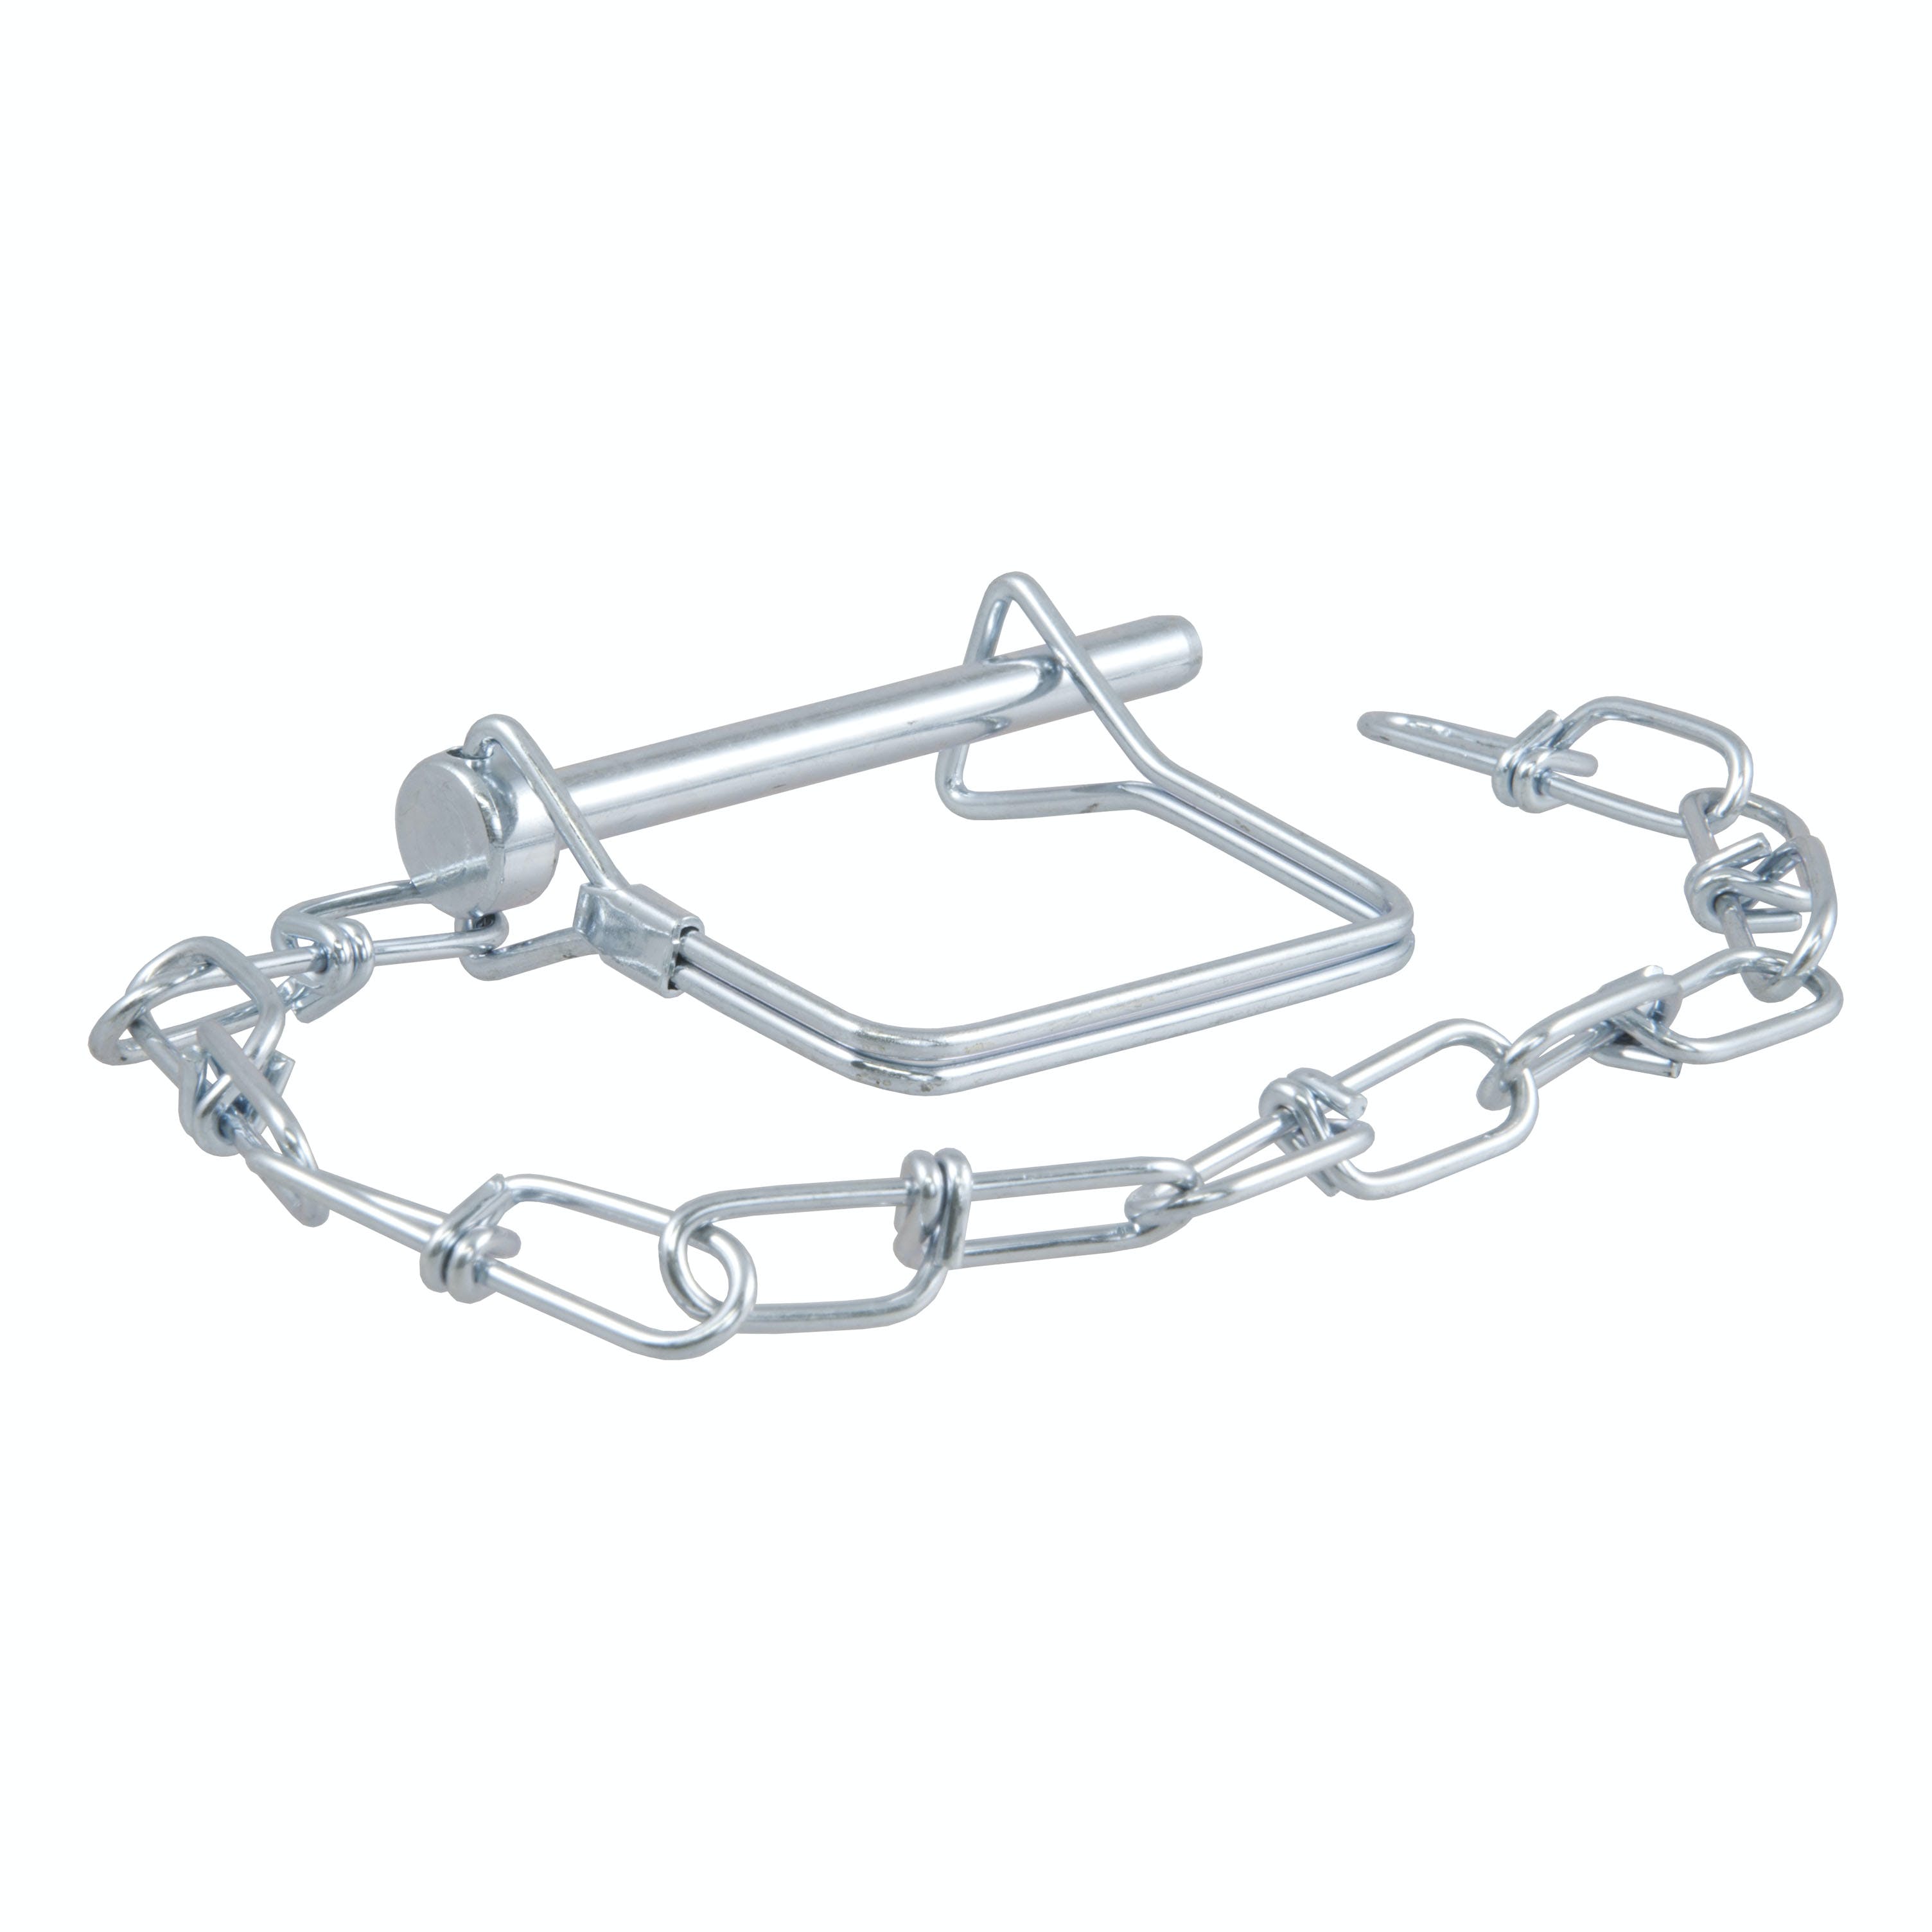 CURT 25012 1/4 Safety Pin with 12 Chain (2-3/4 Pin Length)